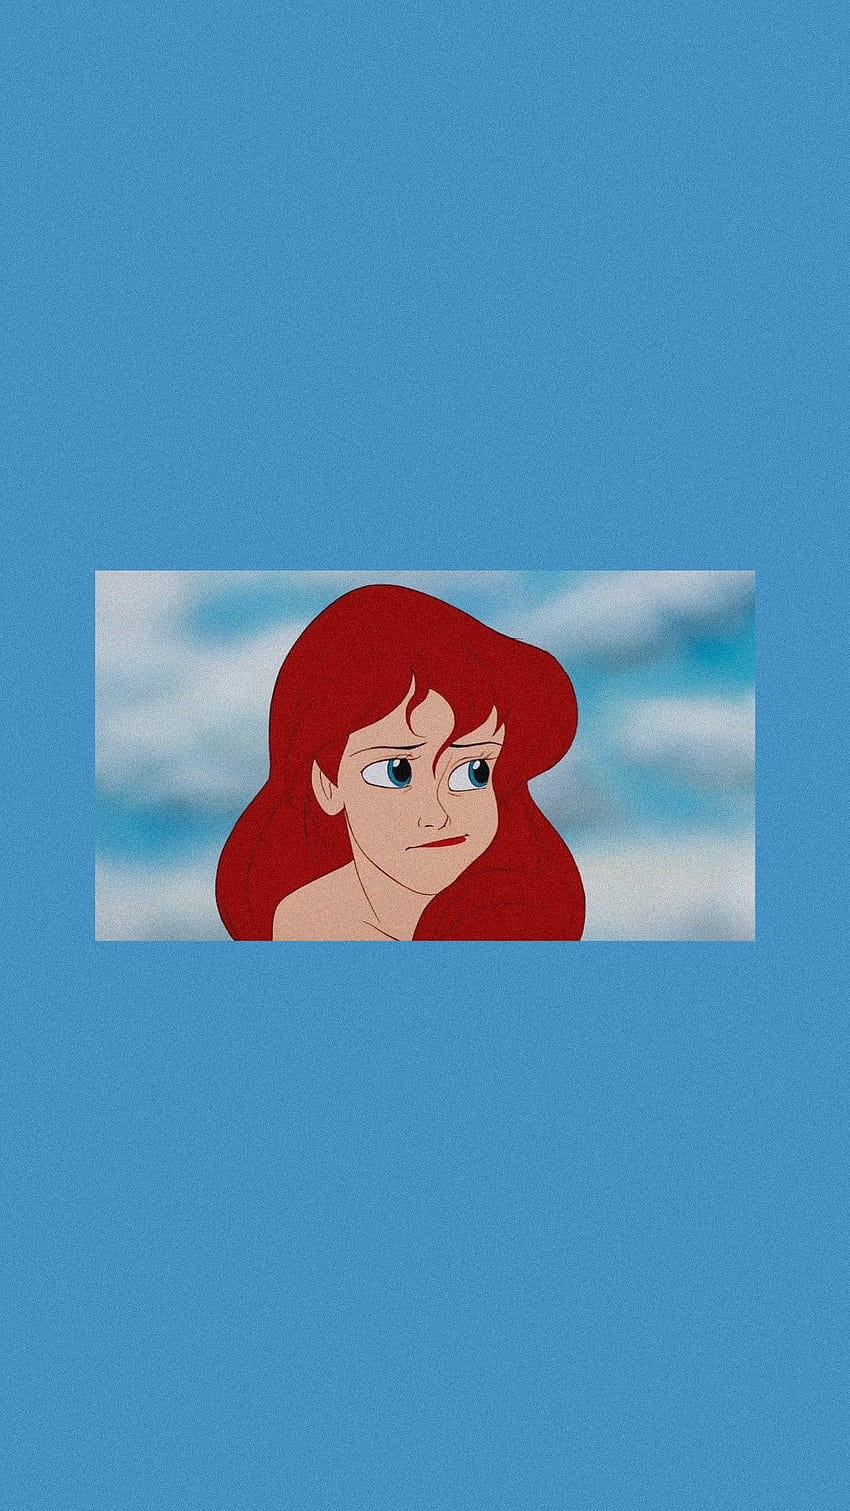 Ariel from the little mermaid is shown on this blue background - Ariel